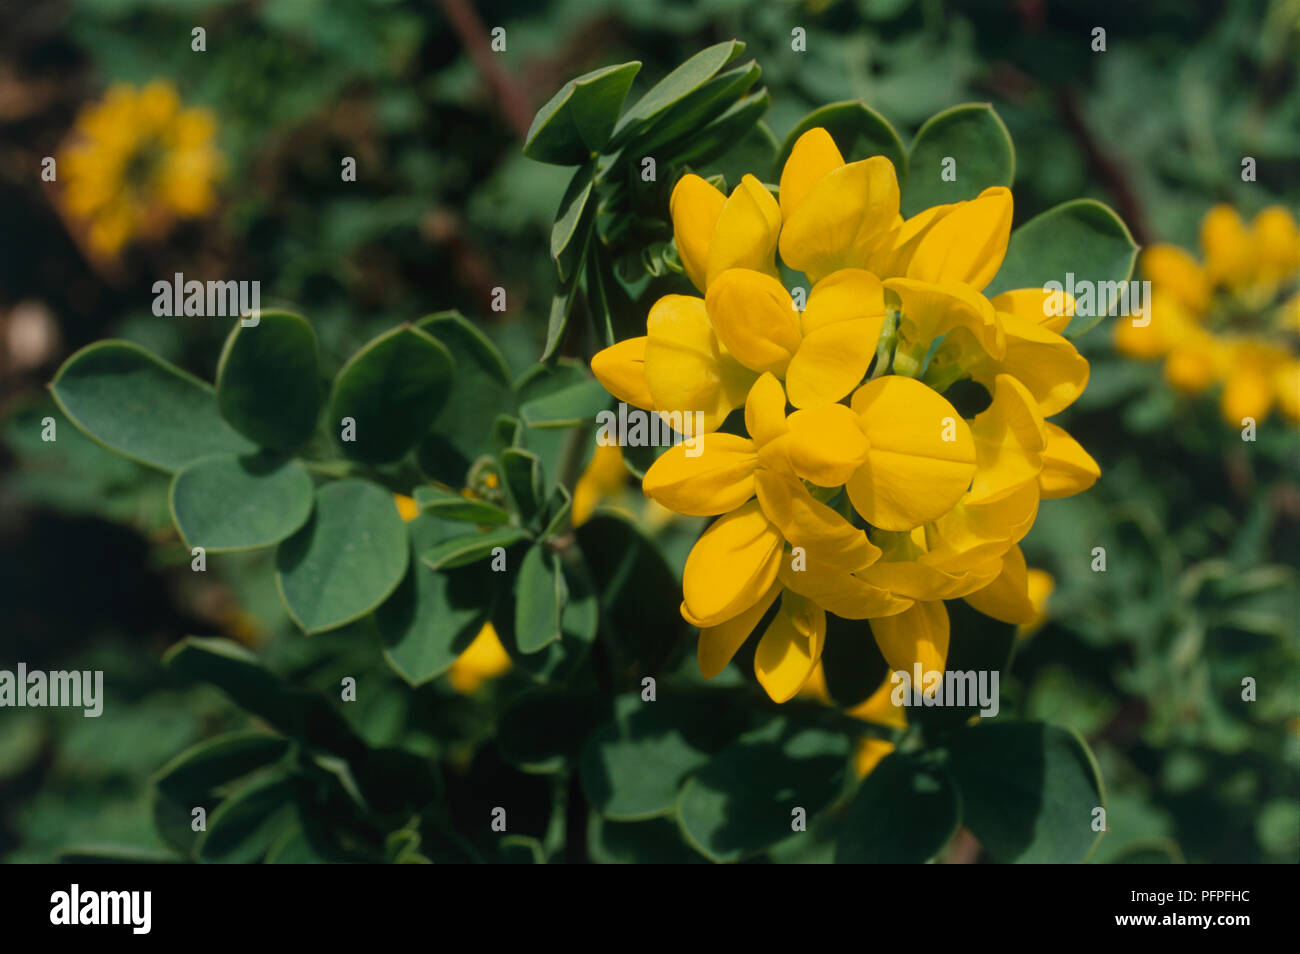 Coronilla valentina subsp. glauca 'Citrina' with cluster of yellow flowers, and green leaves, close-up Stock Photo